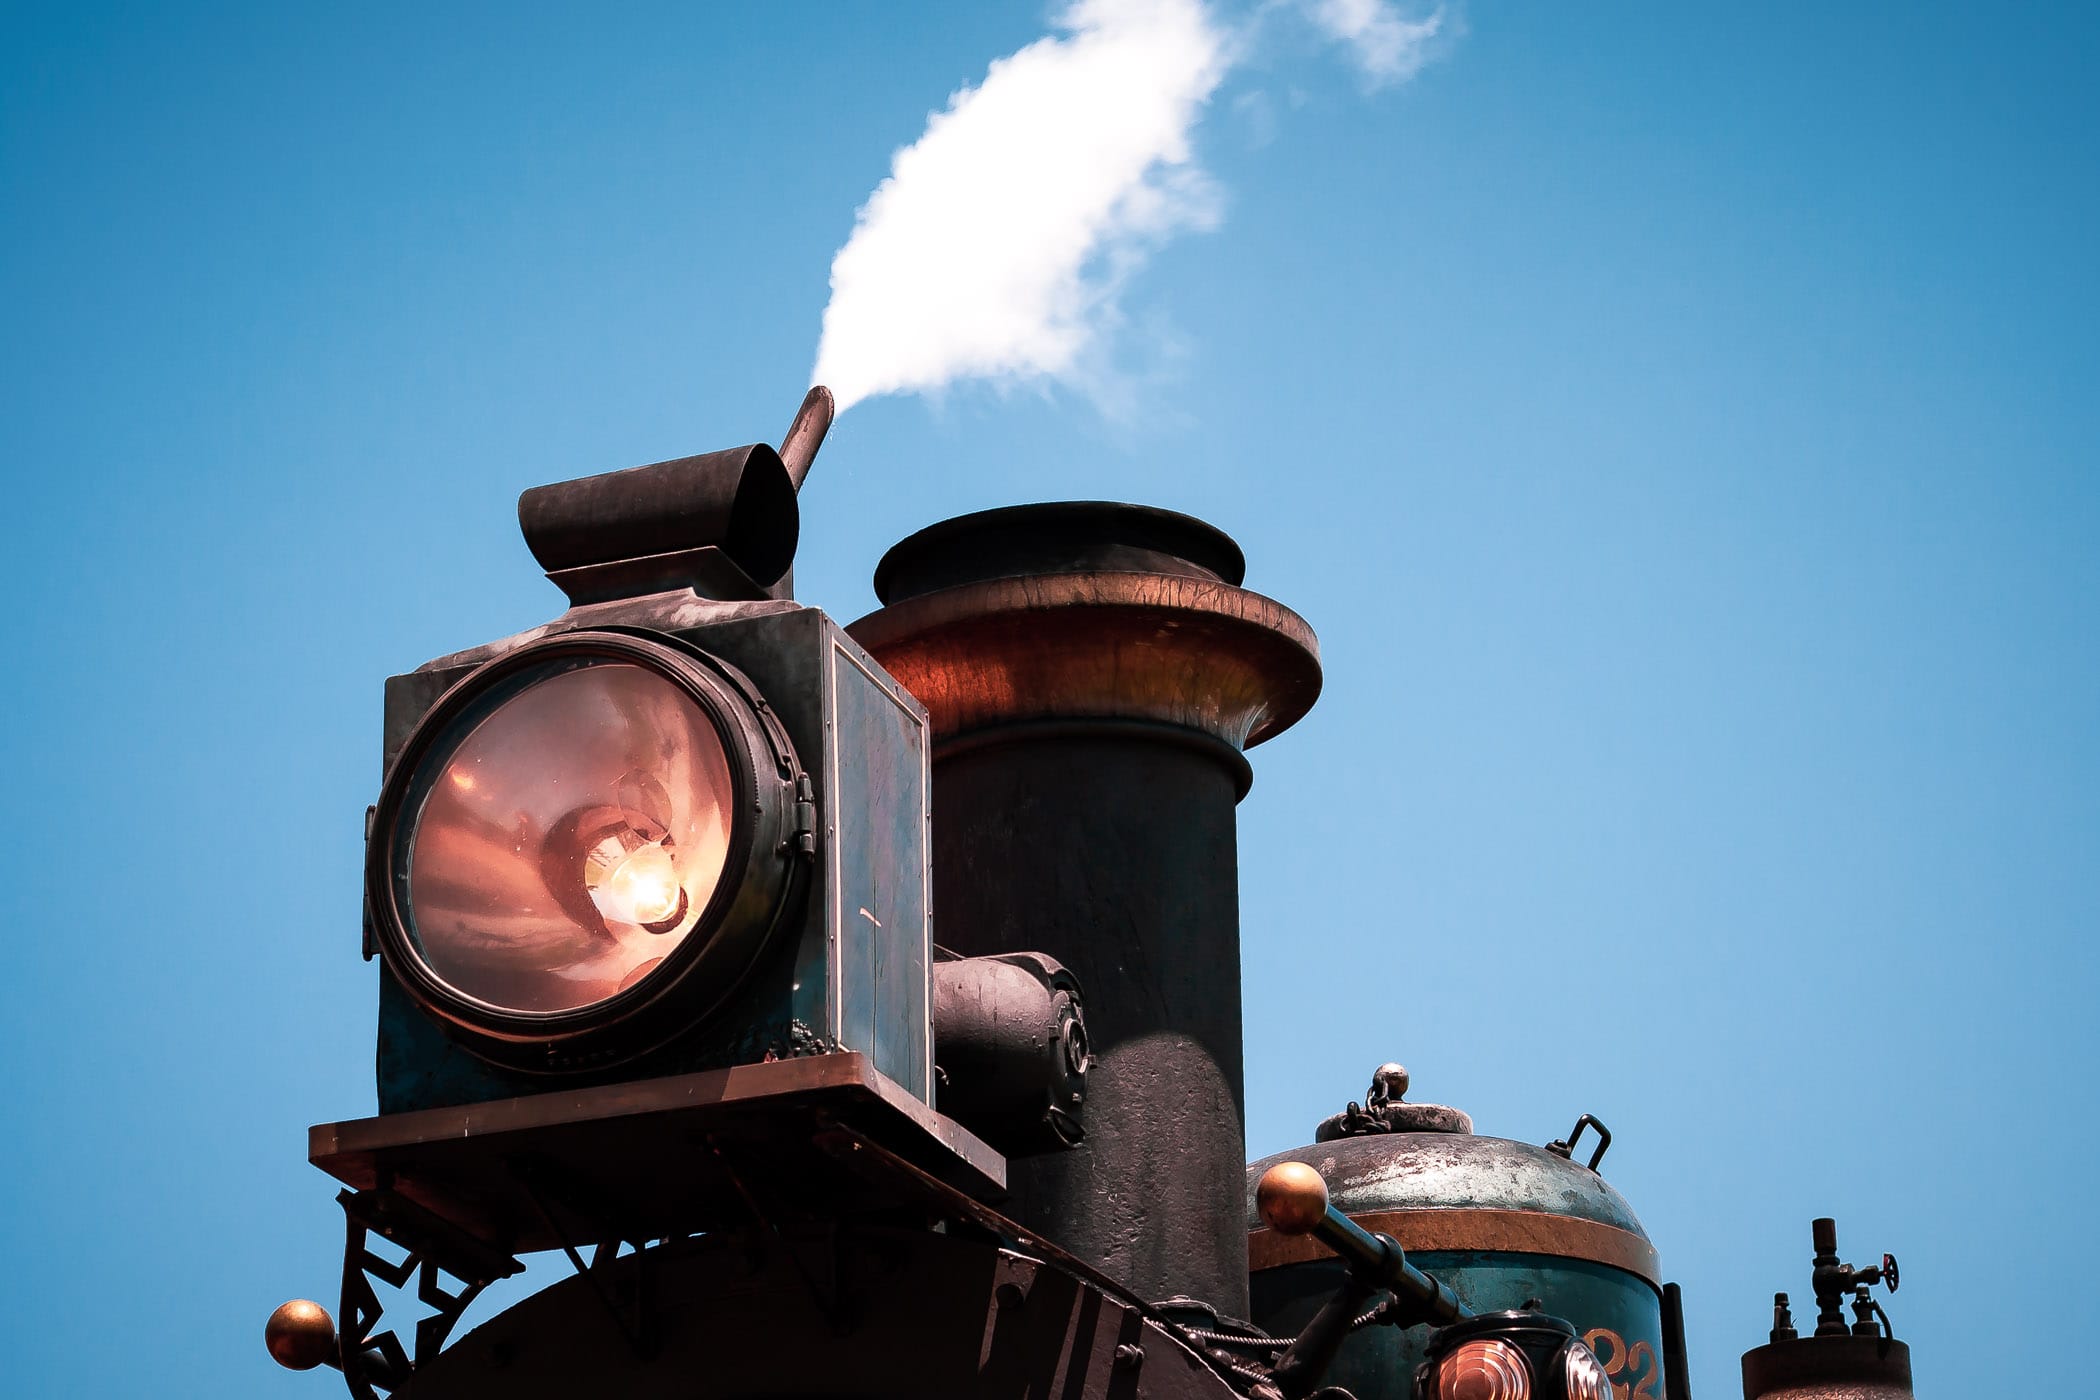 Detail of an 1896 steam locomotive belonging to the Grapevine Vintage Railroad, Grapevine, Texas.